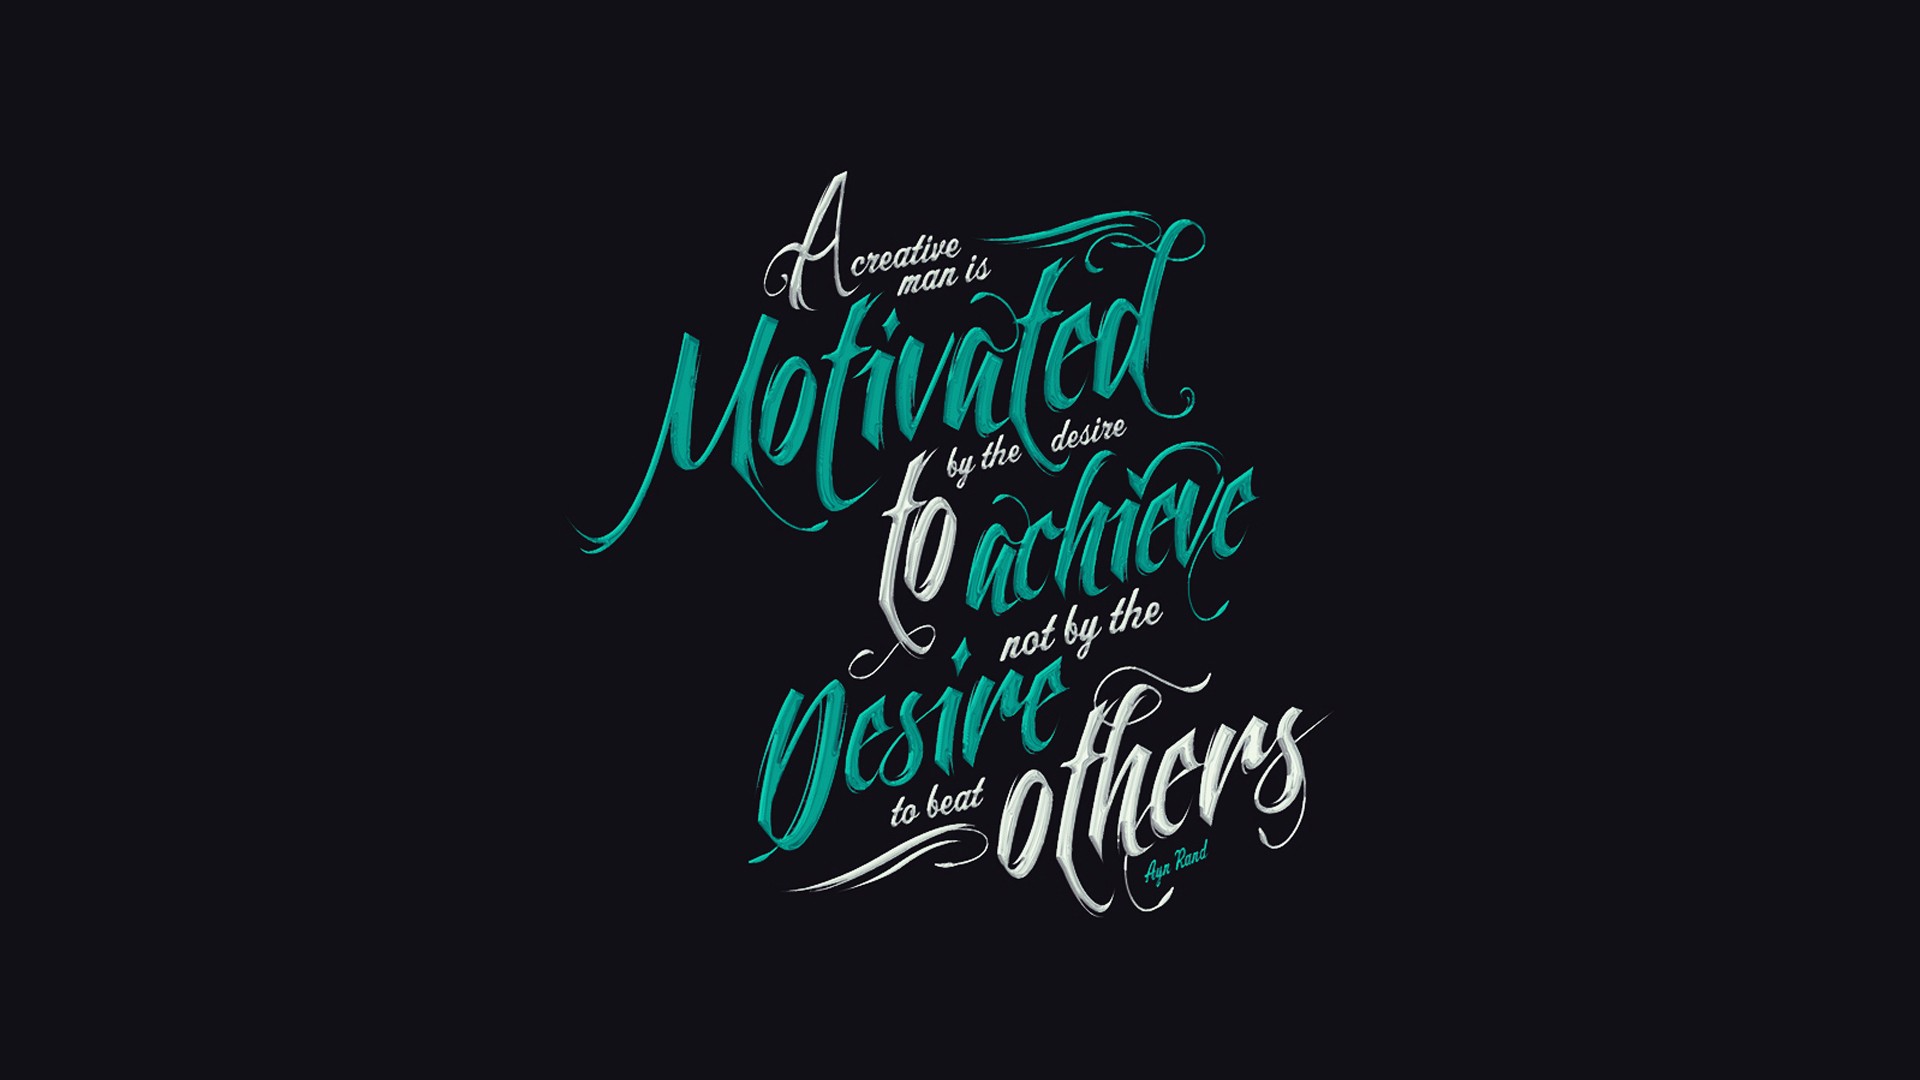 quote, Typography, Dark Background, Simple Background, Motivational